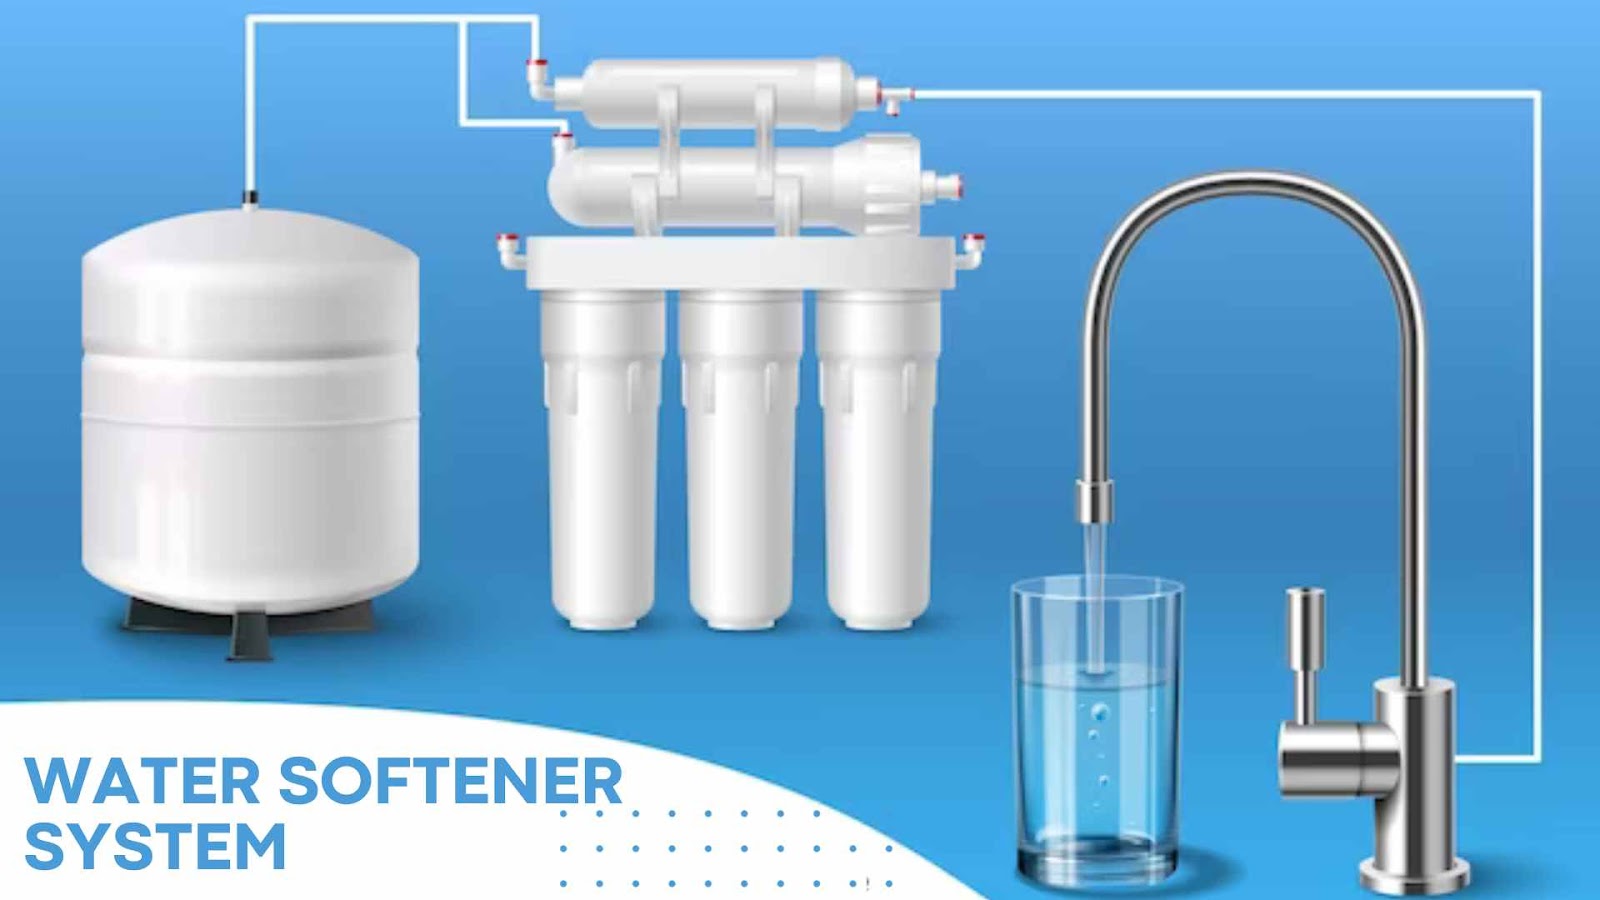 Some additional features that affect the installation cost of water softener systems